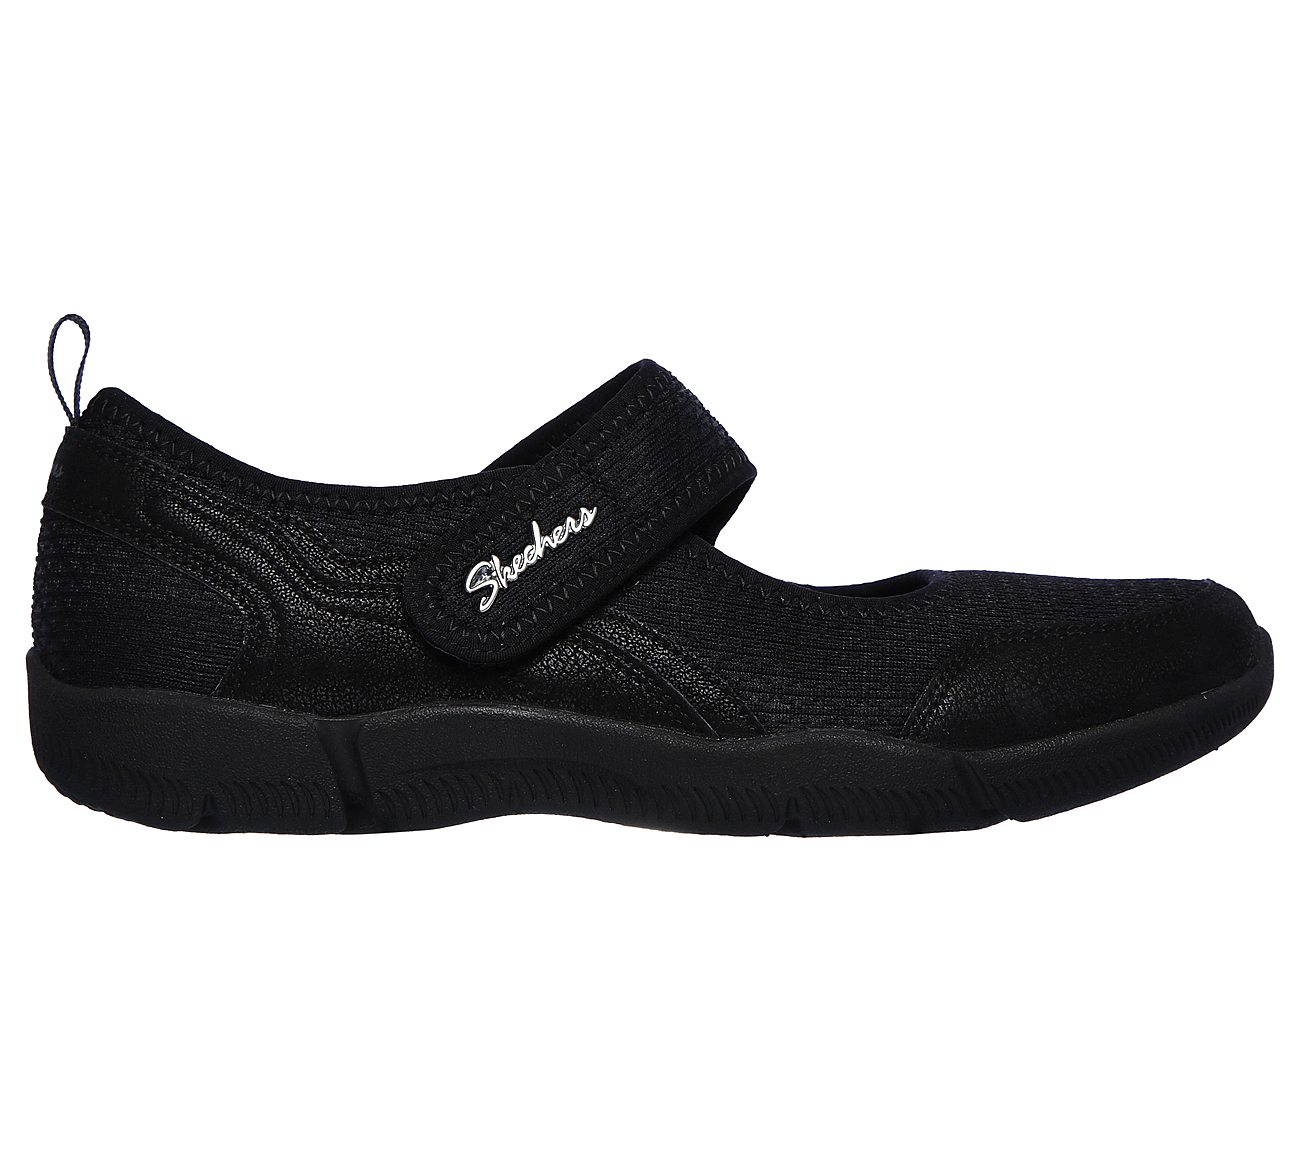 skechers mary jane shoes